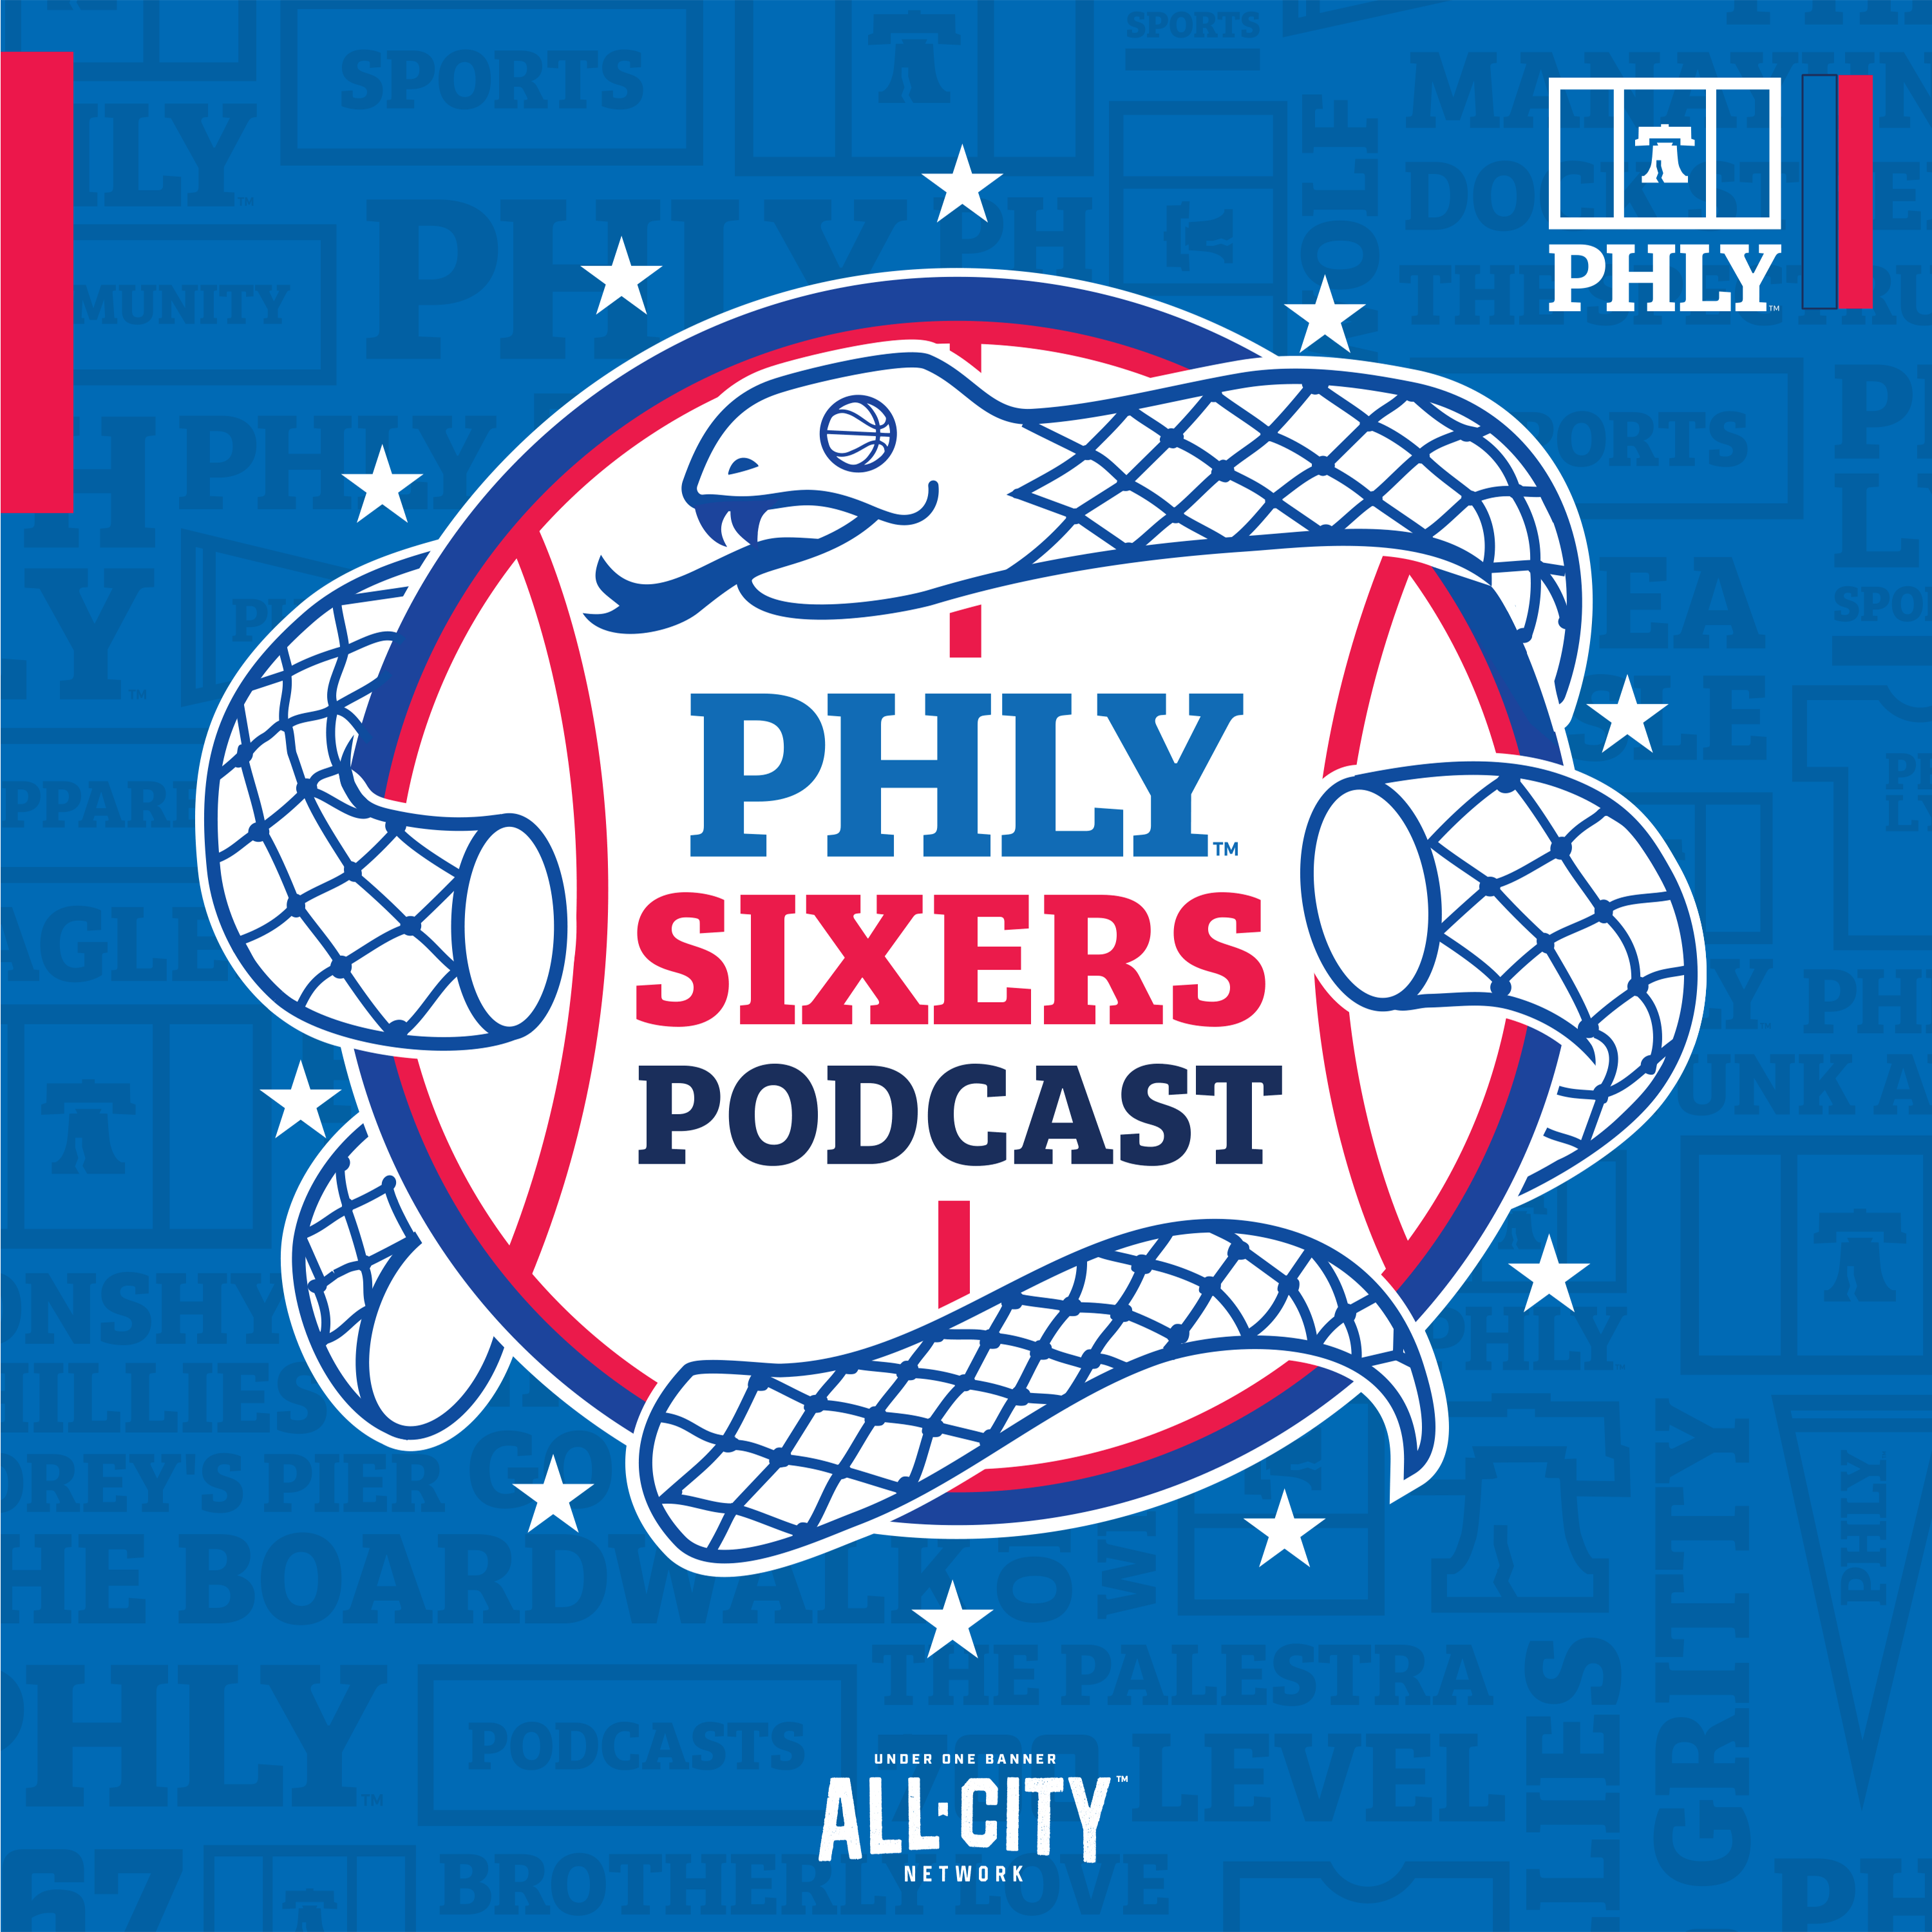 PHLY Sixers Podcast | What can the Sixers learn from the remaining playoff teams?